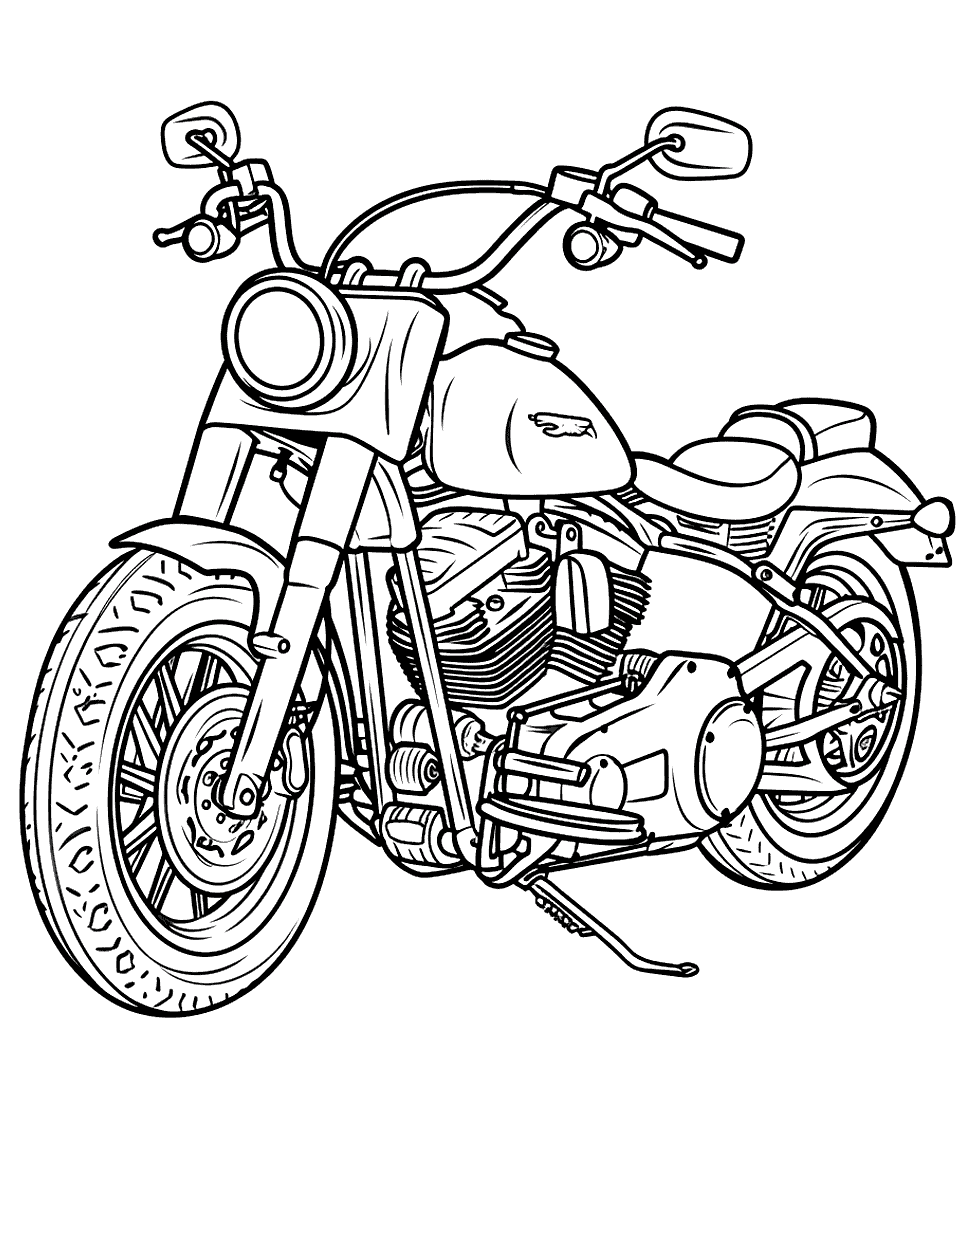 Vintage Motorcycle Coloring Page - A vintage motorcycle with classic design details, parked.